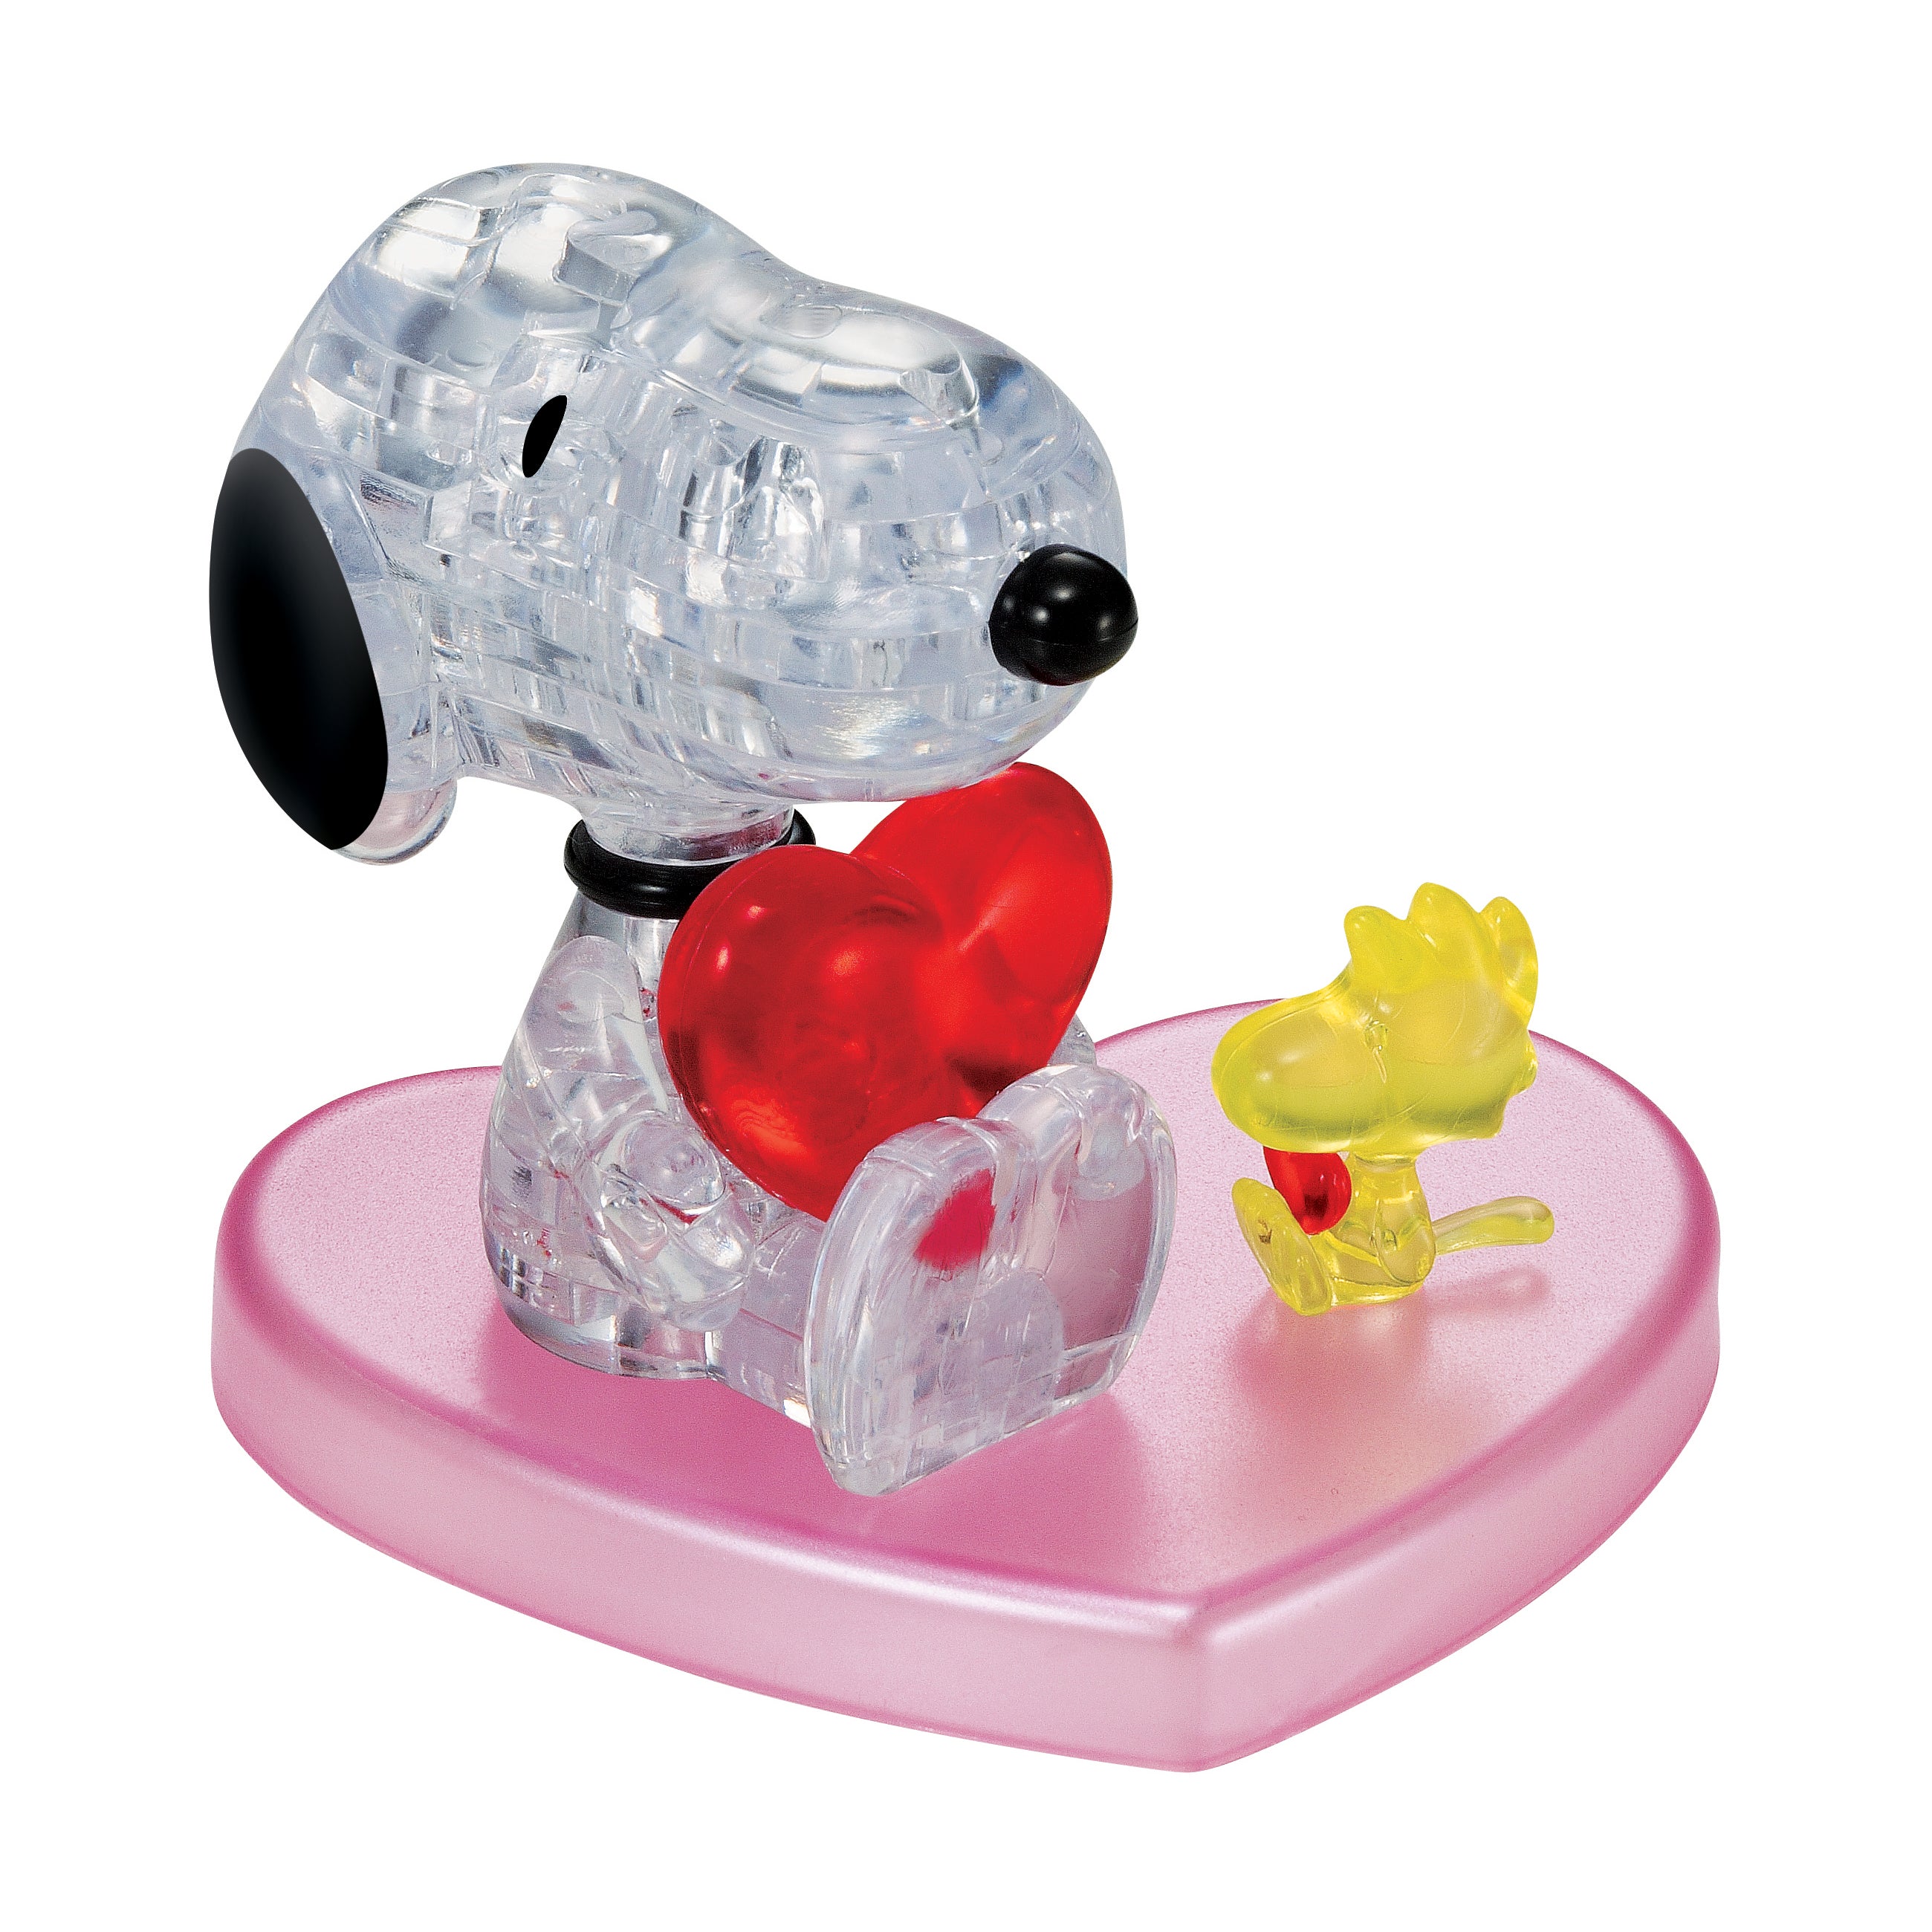 3D Crystal Puzzle - Snoopy Heart: 35 Pcs | AreYouGame – AreYouGame.com